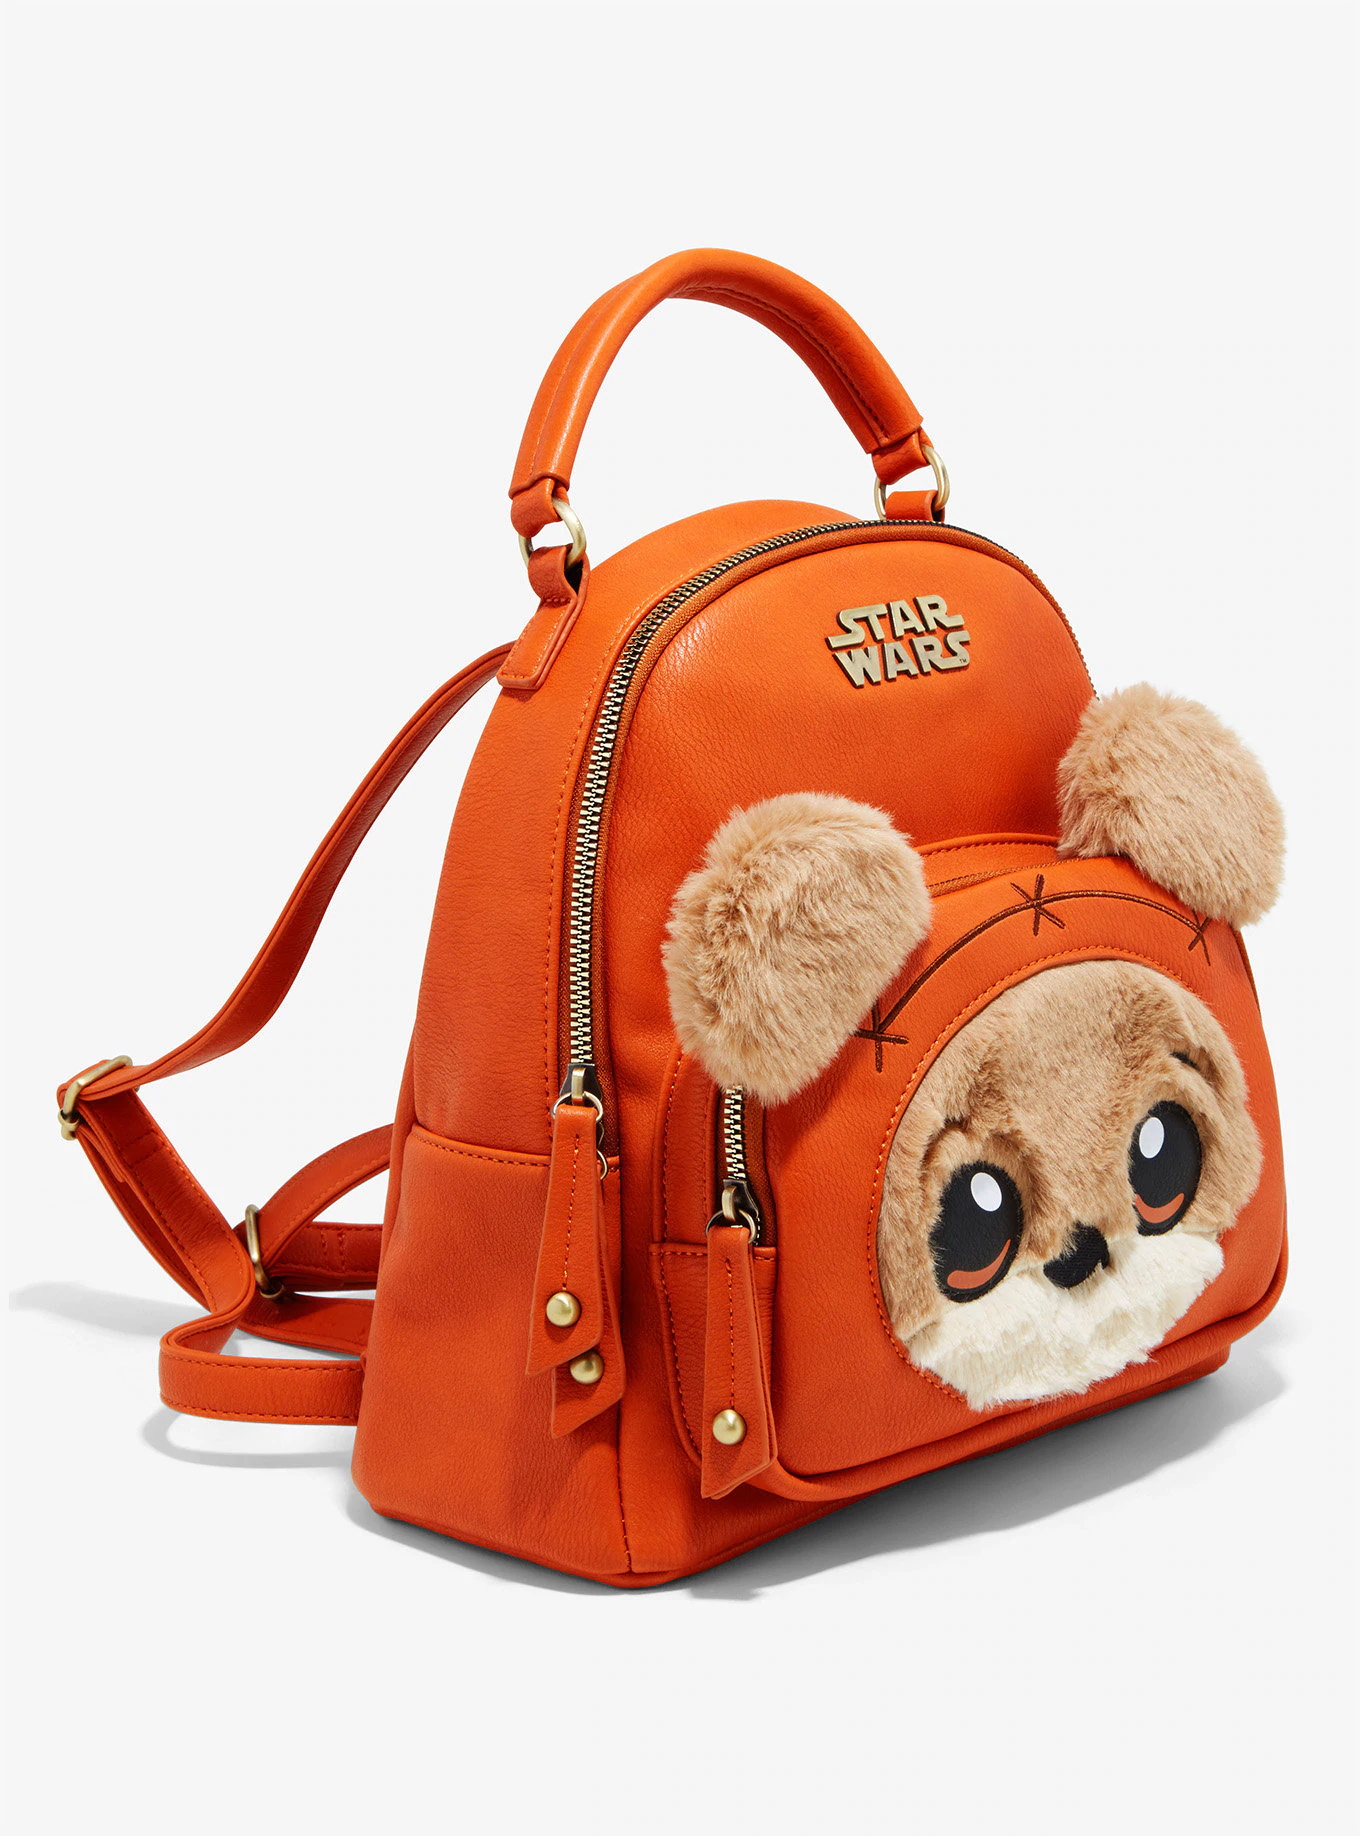 Star Wars Ewok Furry Mini Backpack at her Universe